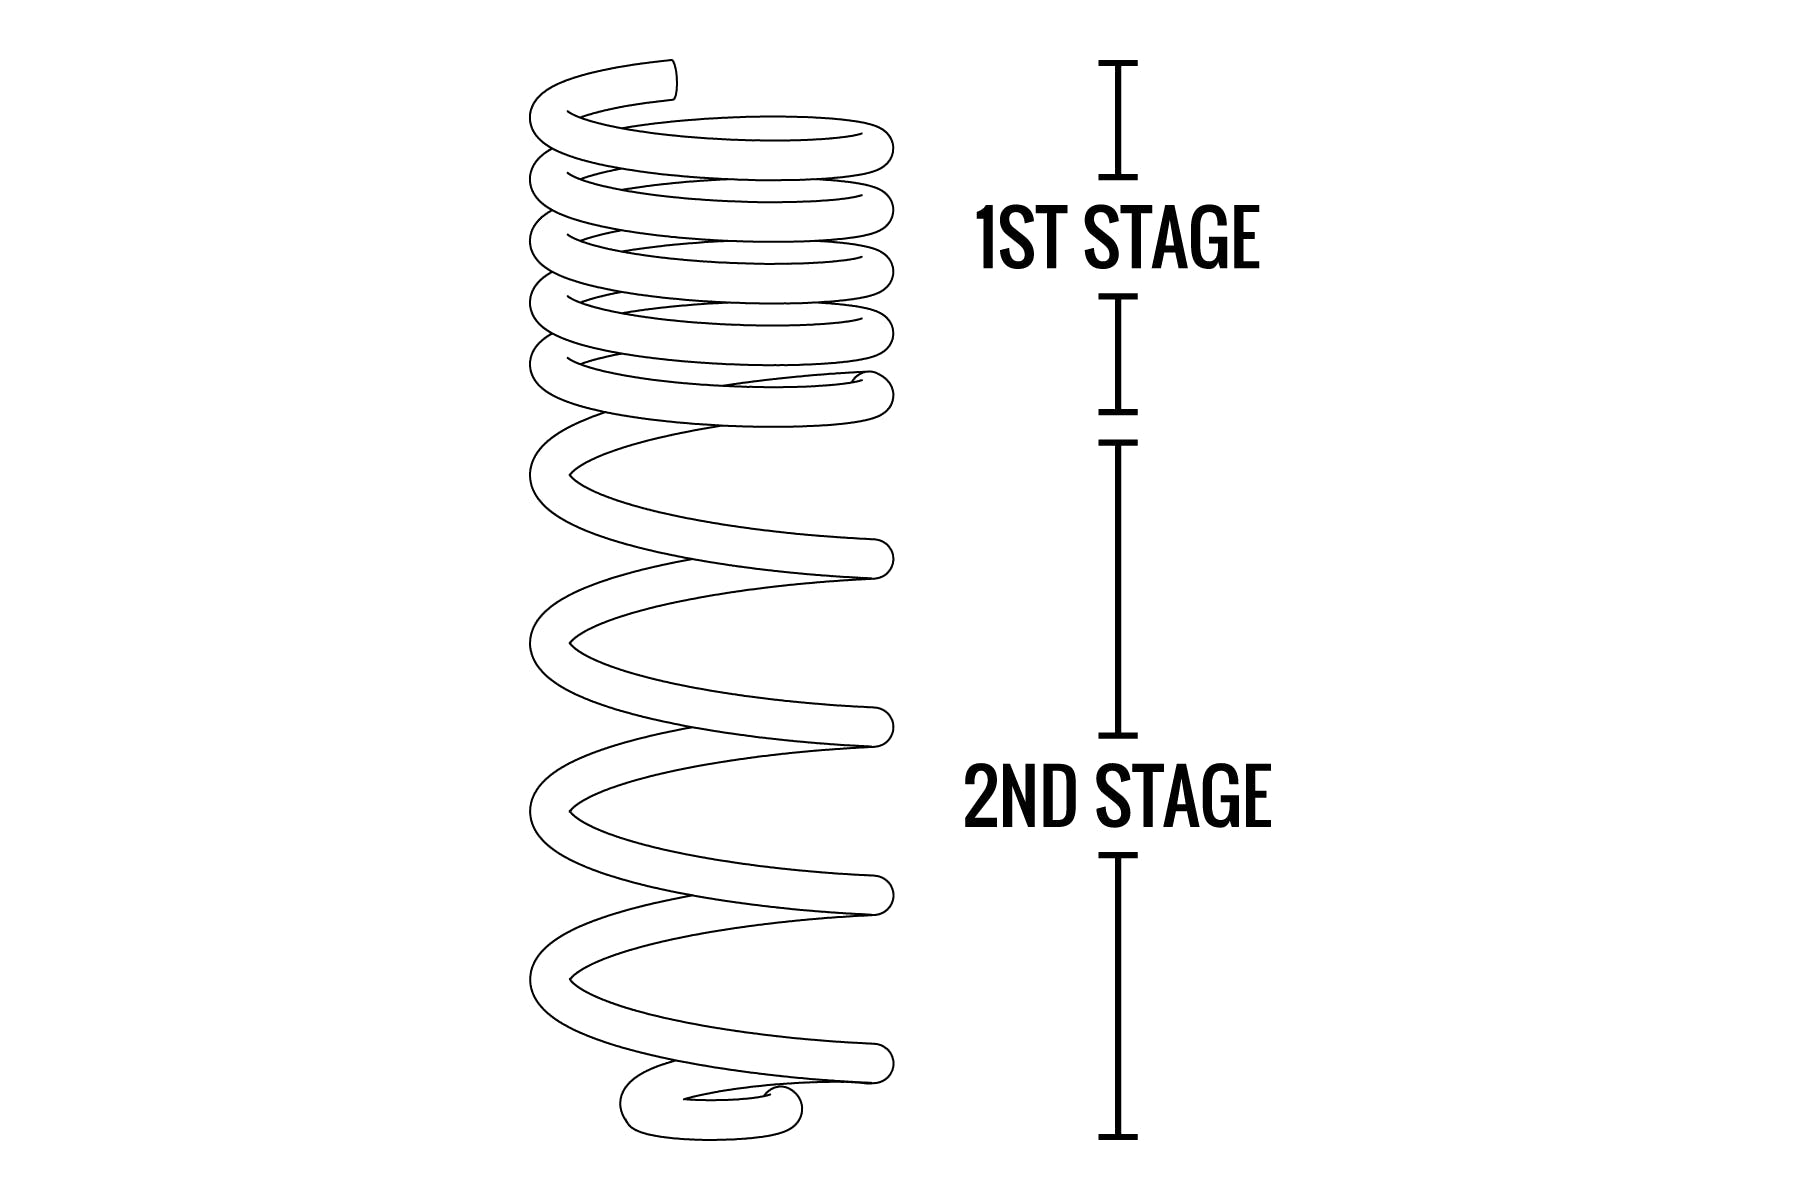 Fabtech FTS24174 Dual Rate Long Travel Coil Springs